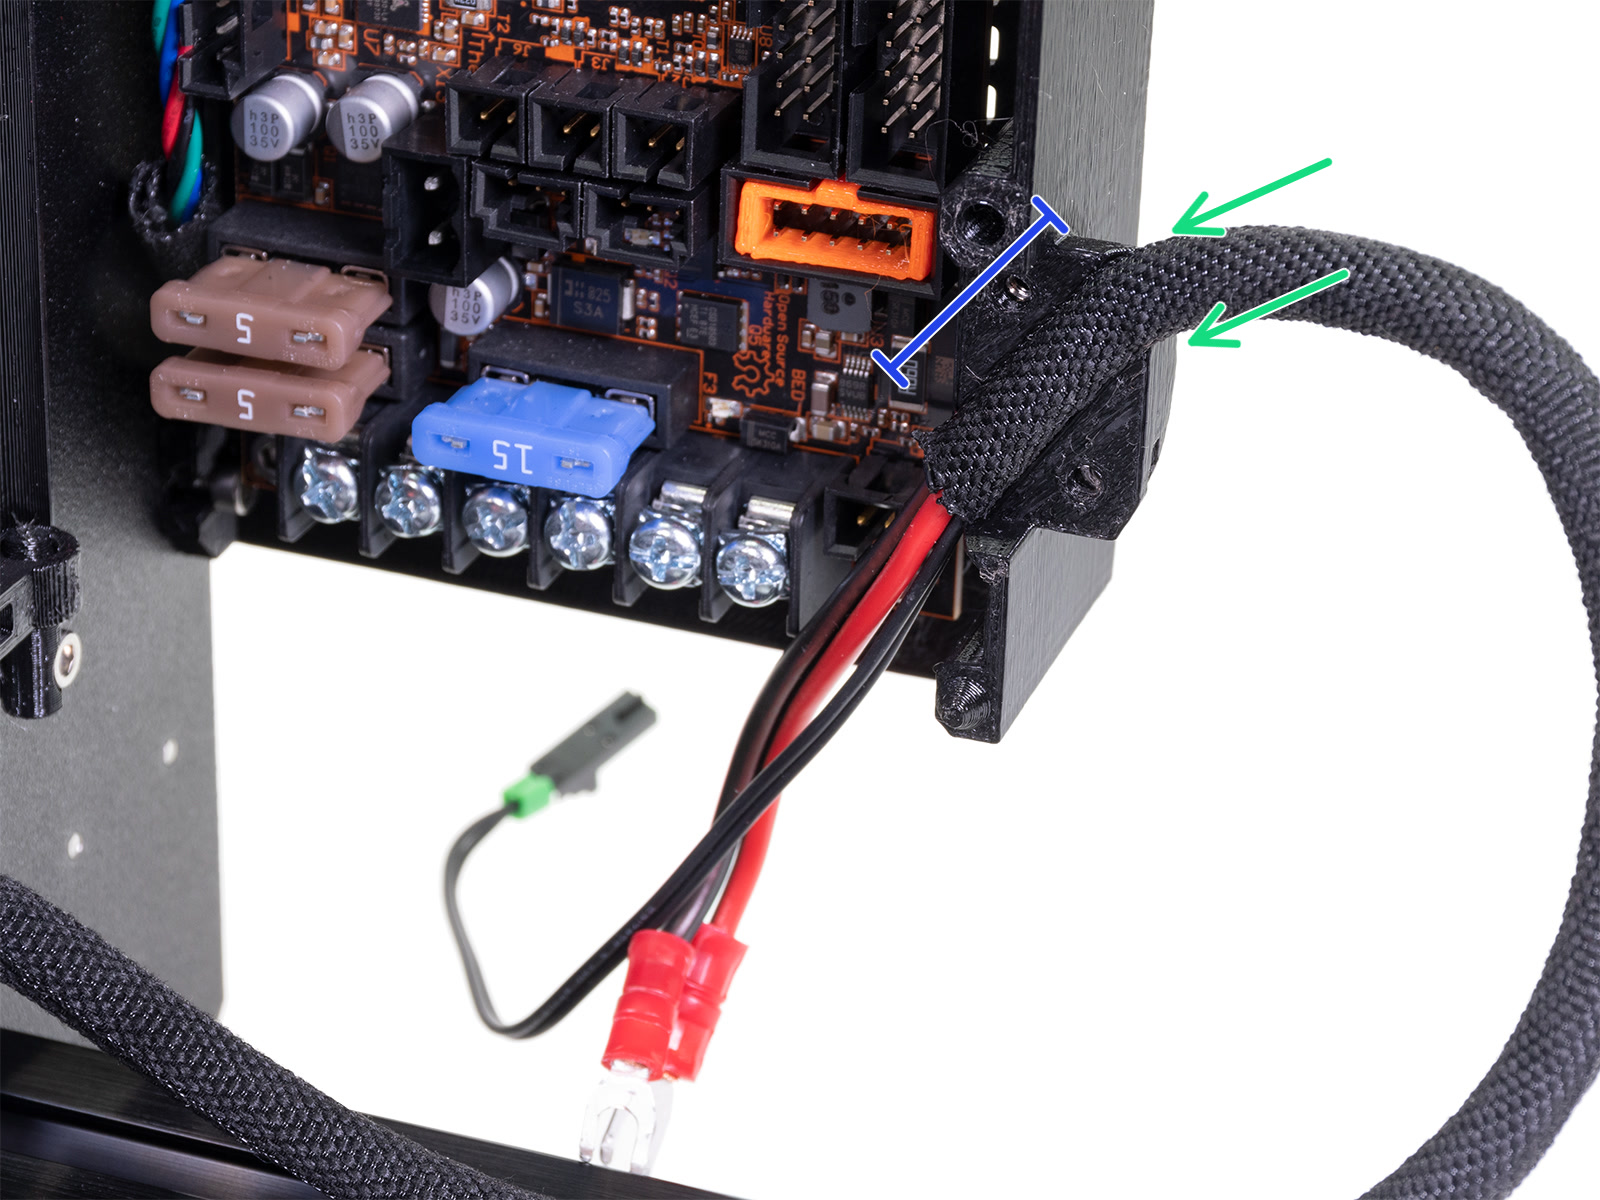 Connecting the heatbed cable bundle